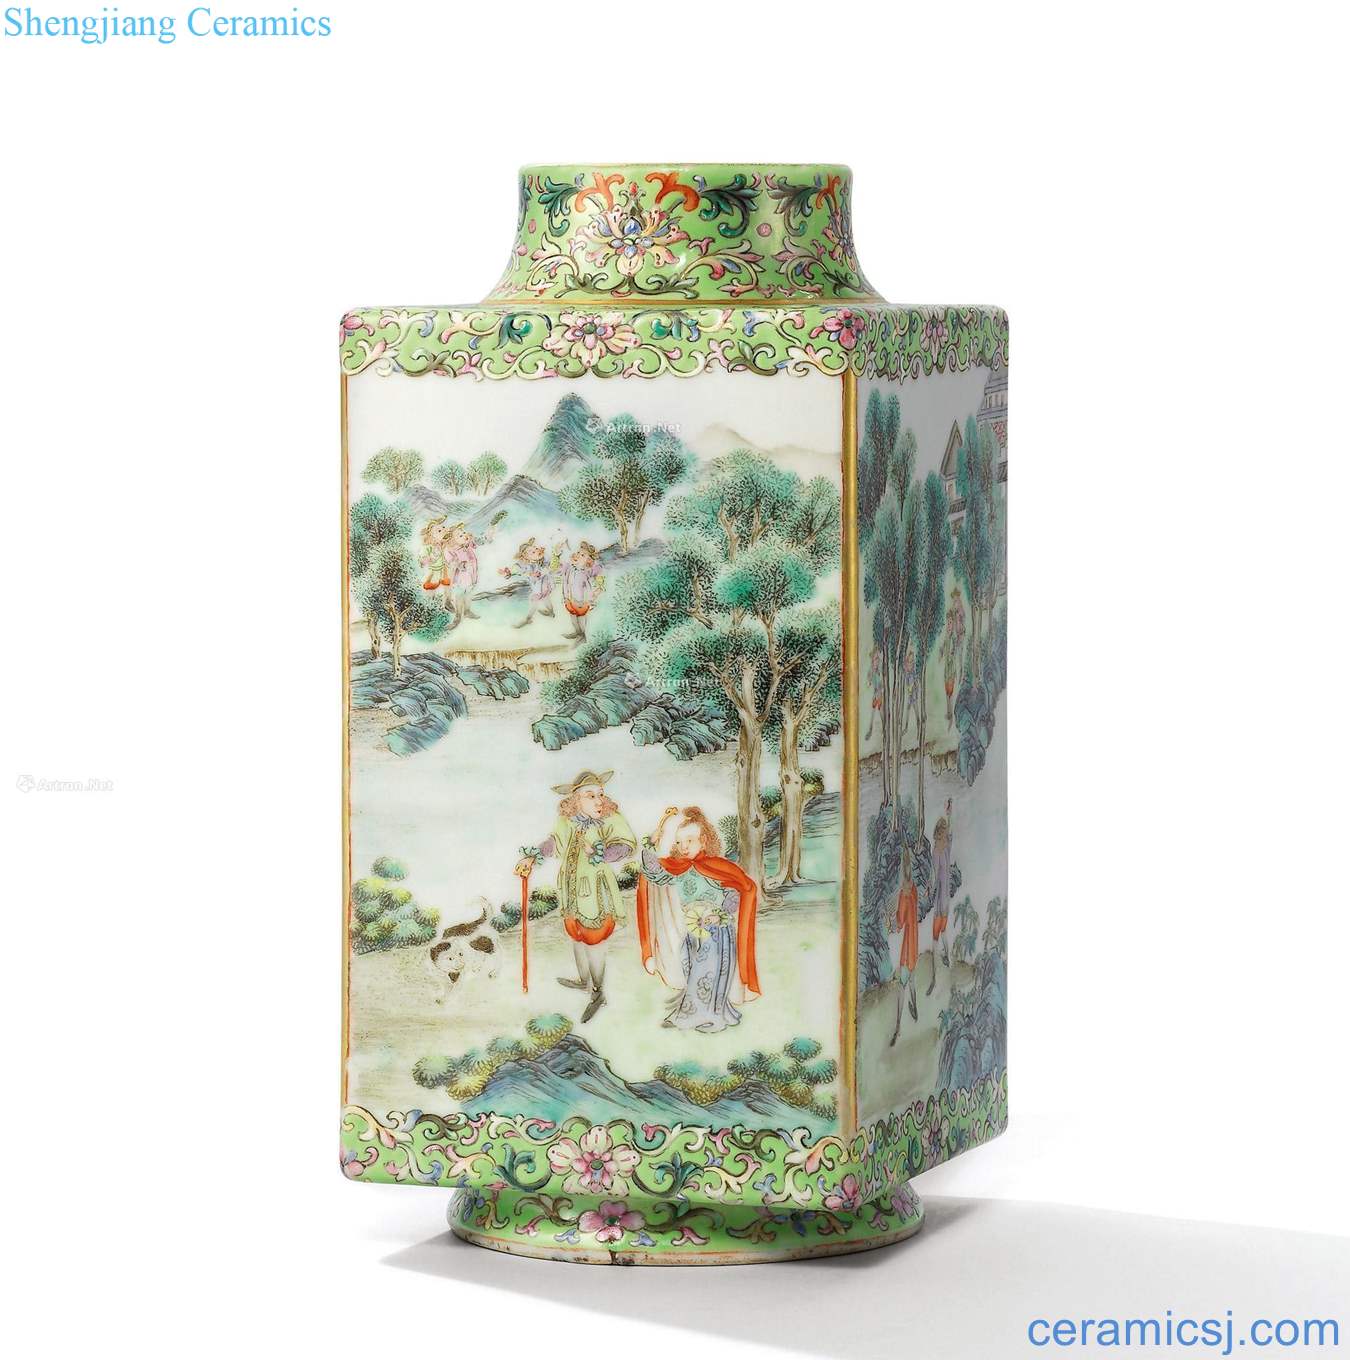 In the 18th century qing figure cong type bottle green enamel western characters